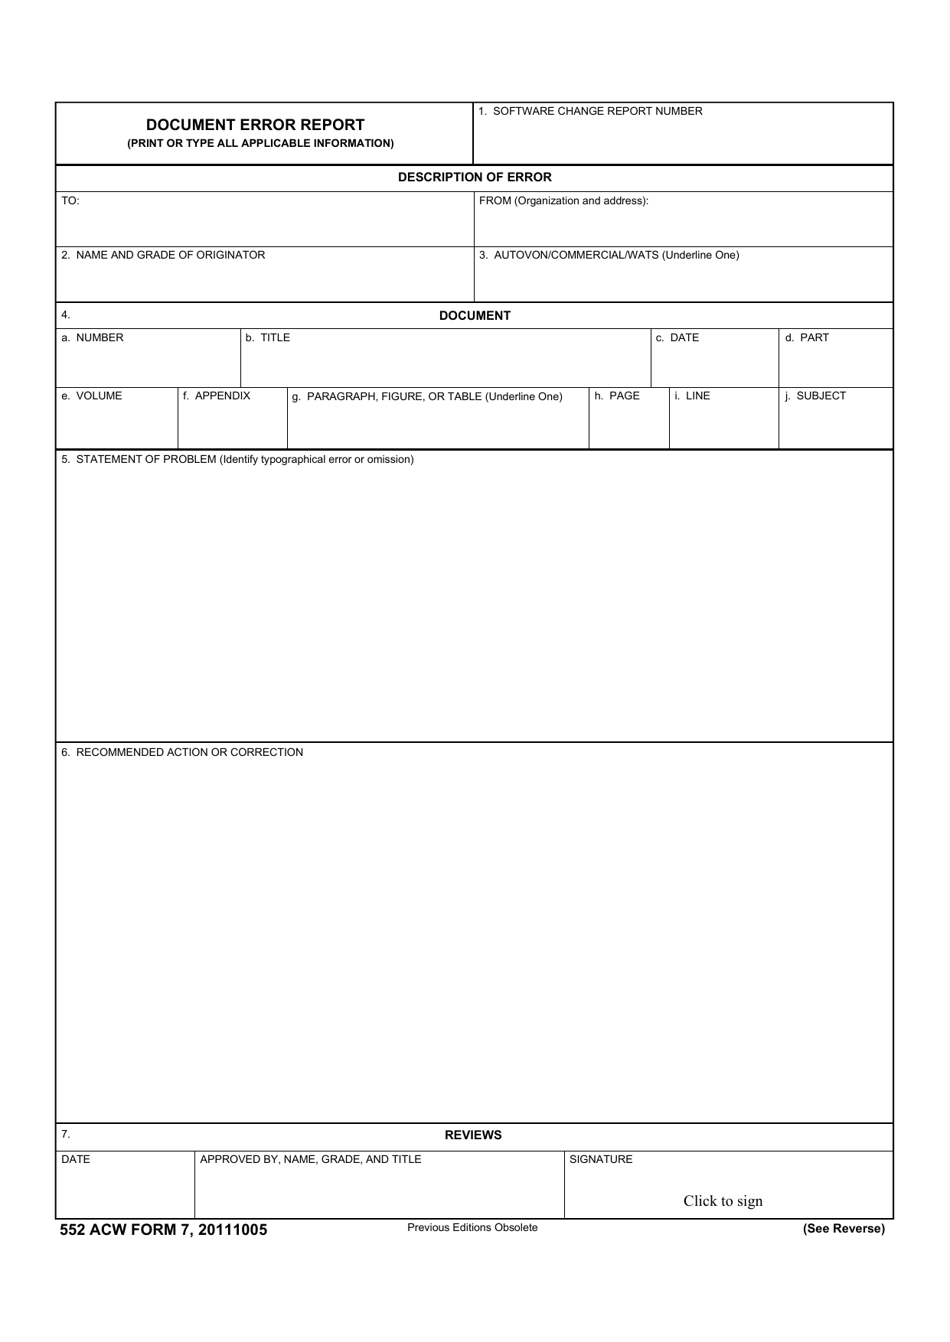 552 ACW Form 7 Document Error Report, Page 1